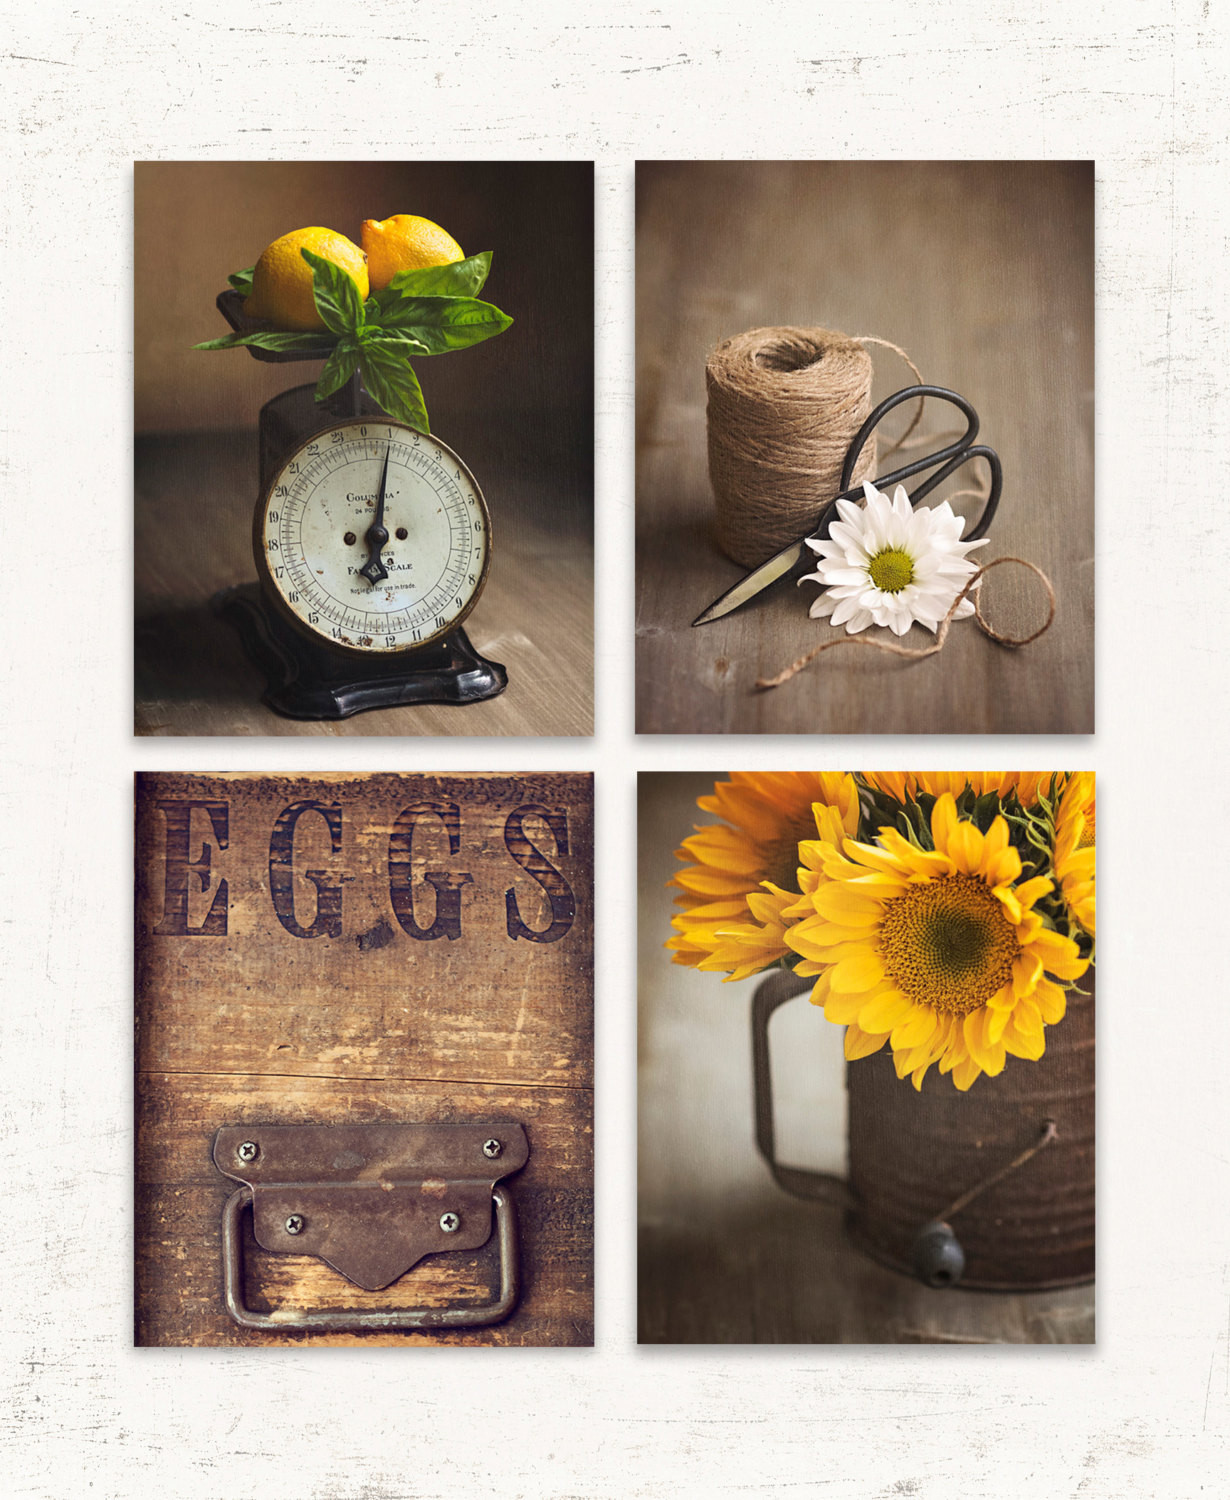 Rustic Kitchen Wall Art
 Rustic Kitchen Wall Art SET of FOUR Prints or Canvases Brown